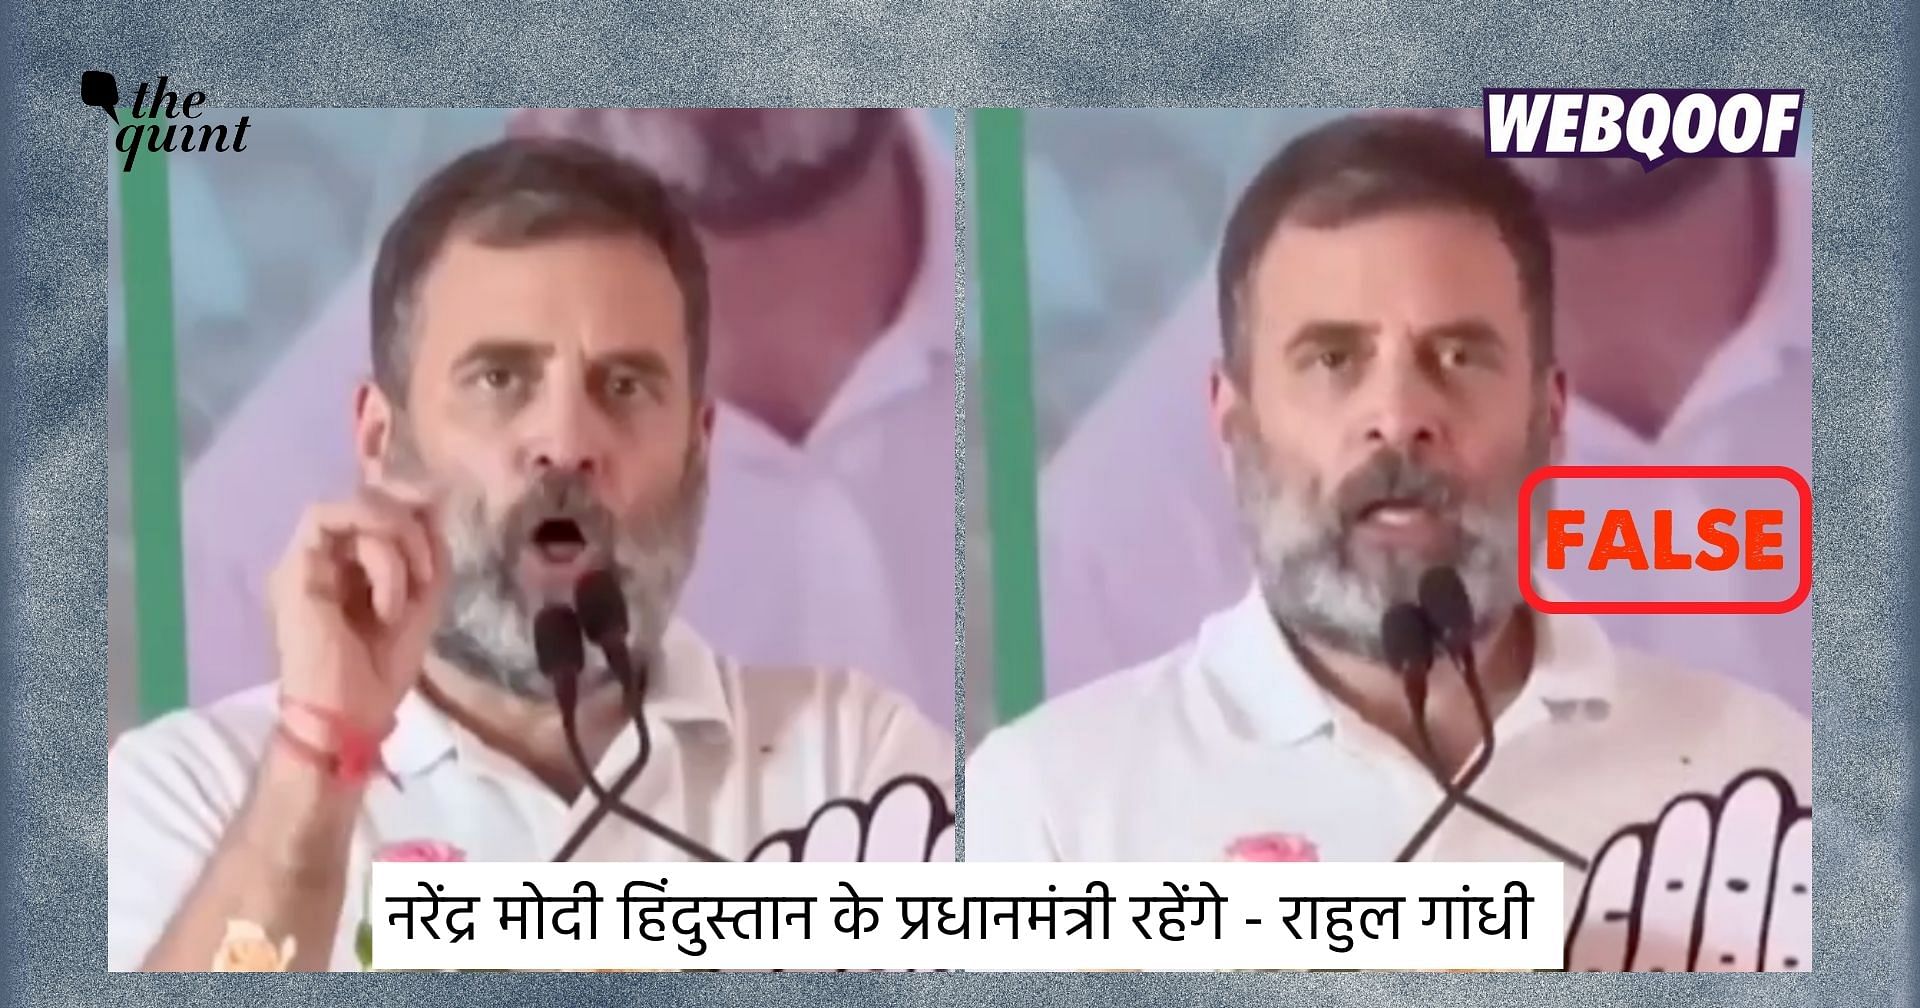 Fact-Check: Viral Video of Rahul Gandhi Saying Modi Will Remain PM Is Edited